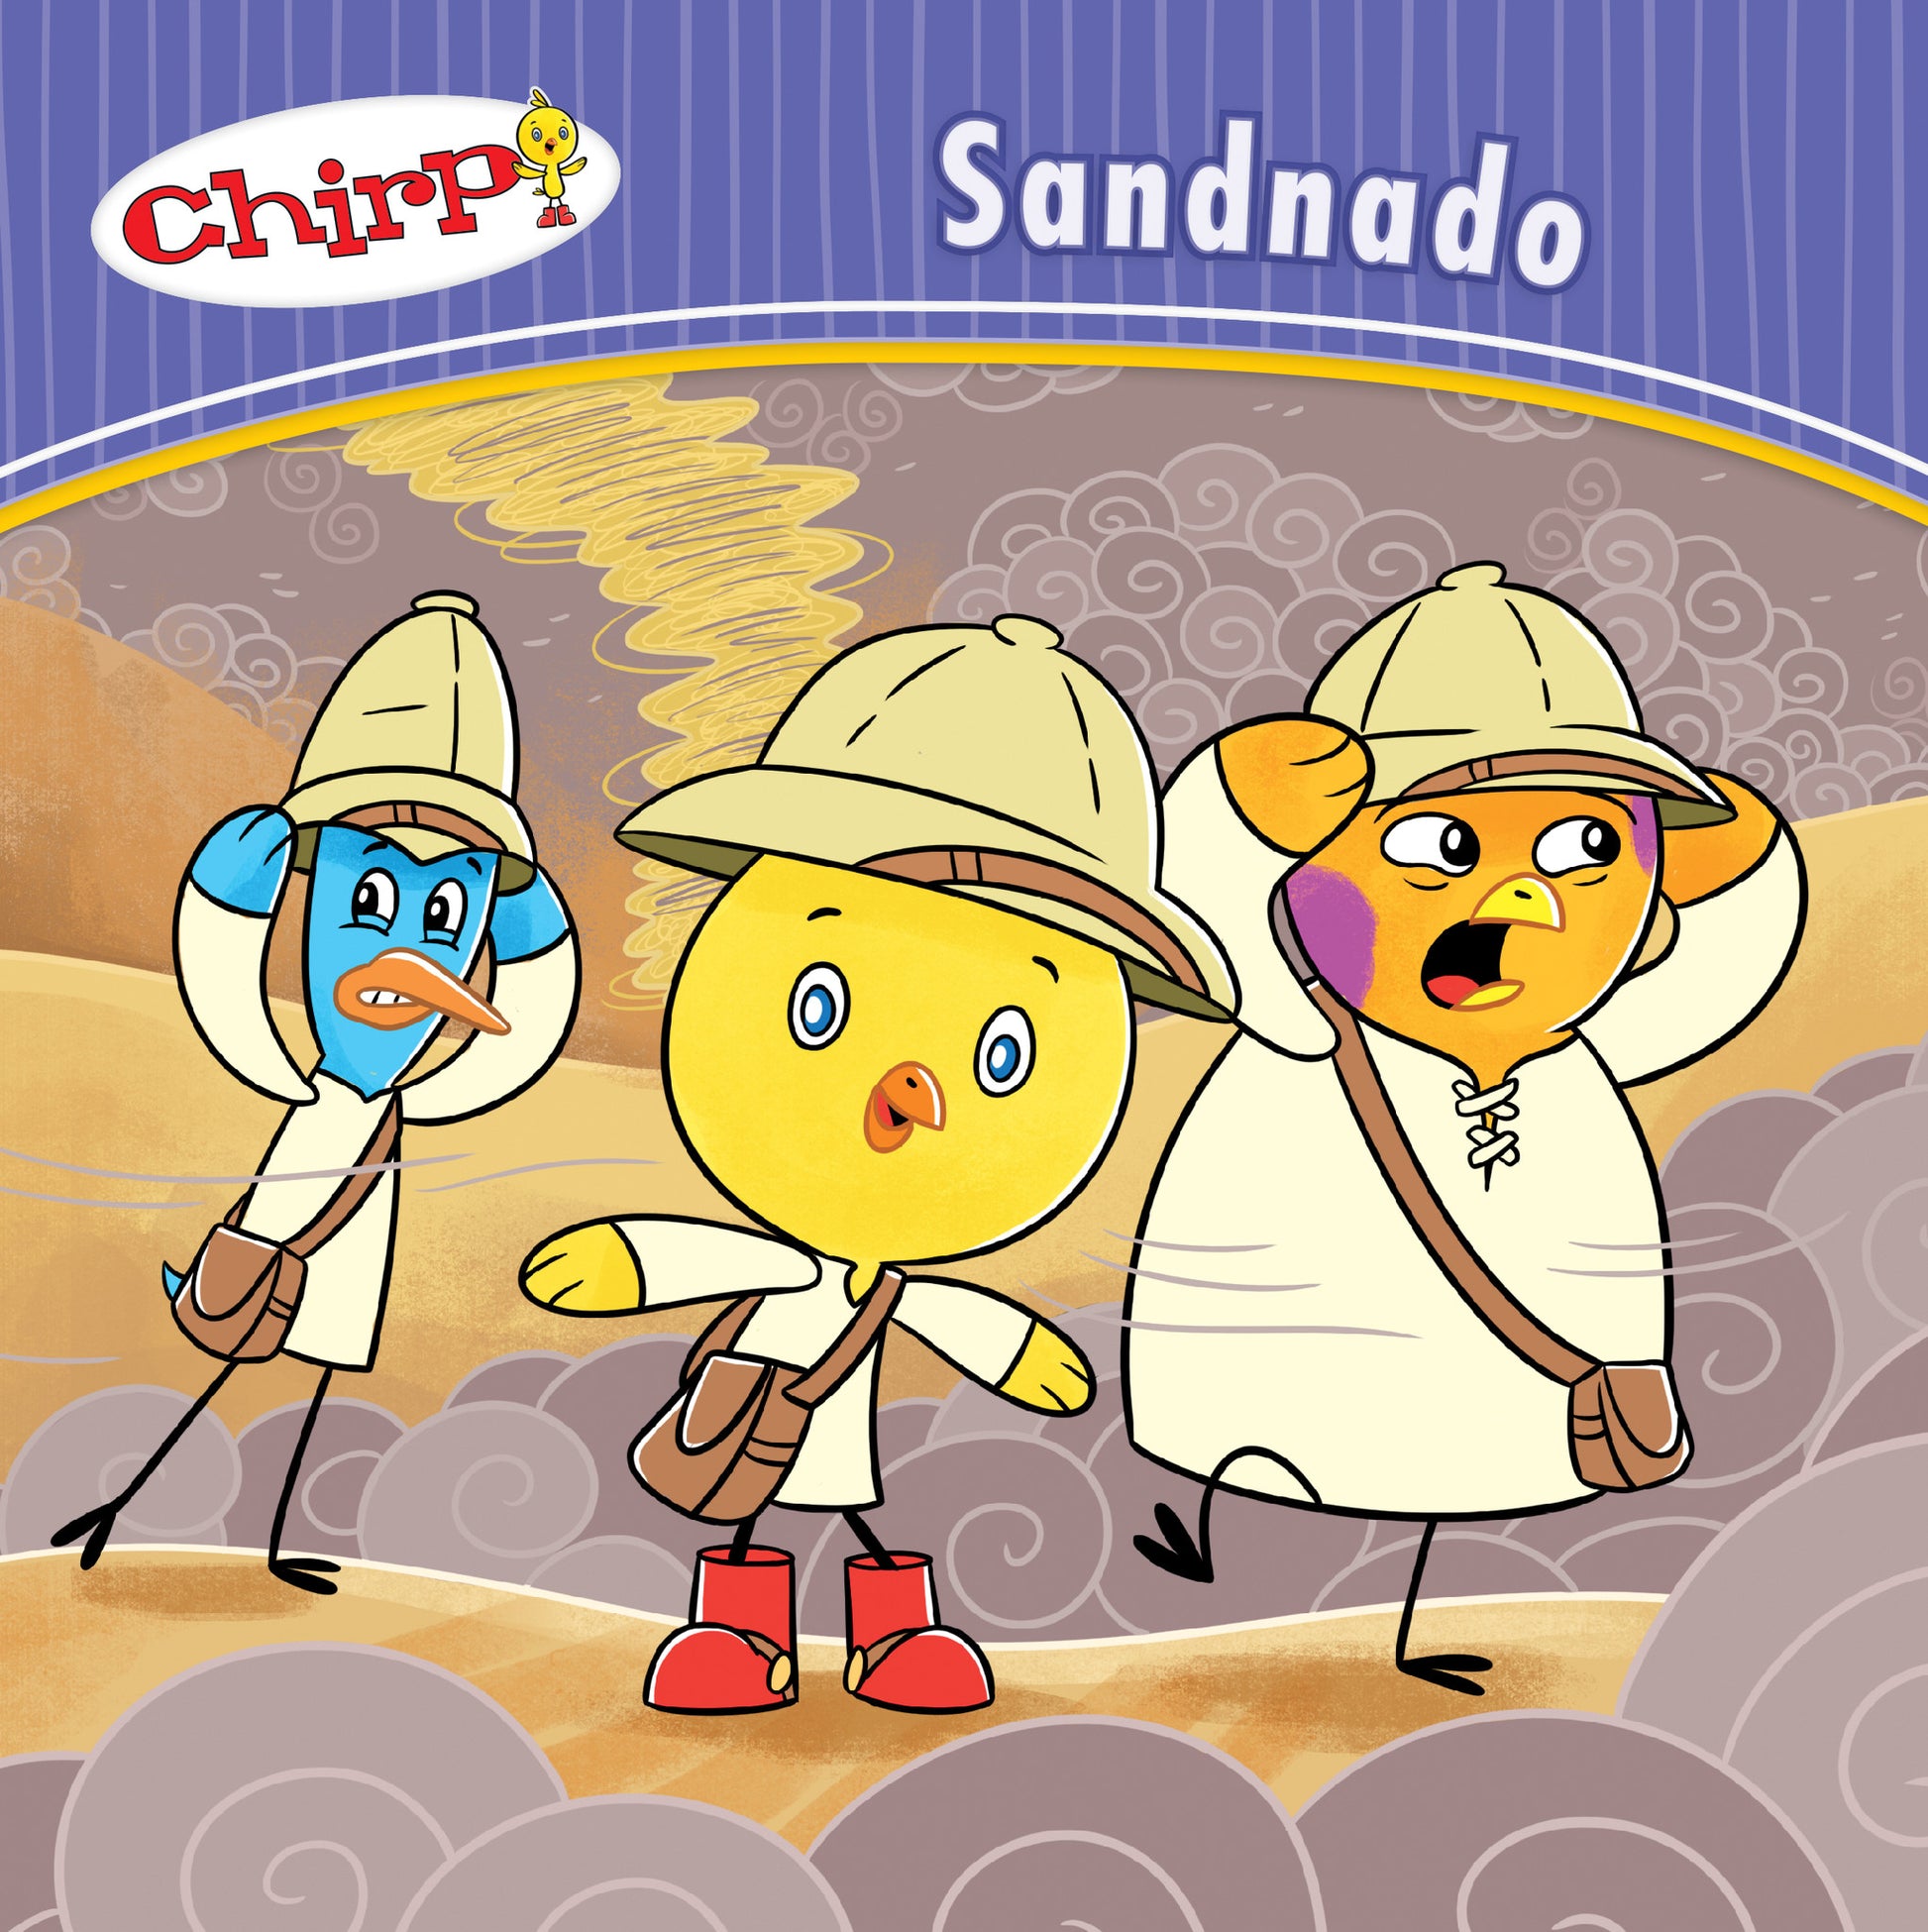 Chirp: Sandnado - Owlkids - Reading for kids and literacy resources for parents made fun. Books helping kids to learn.